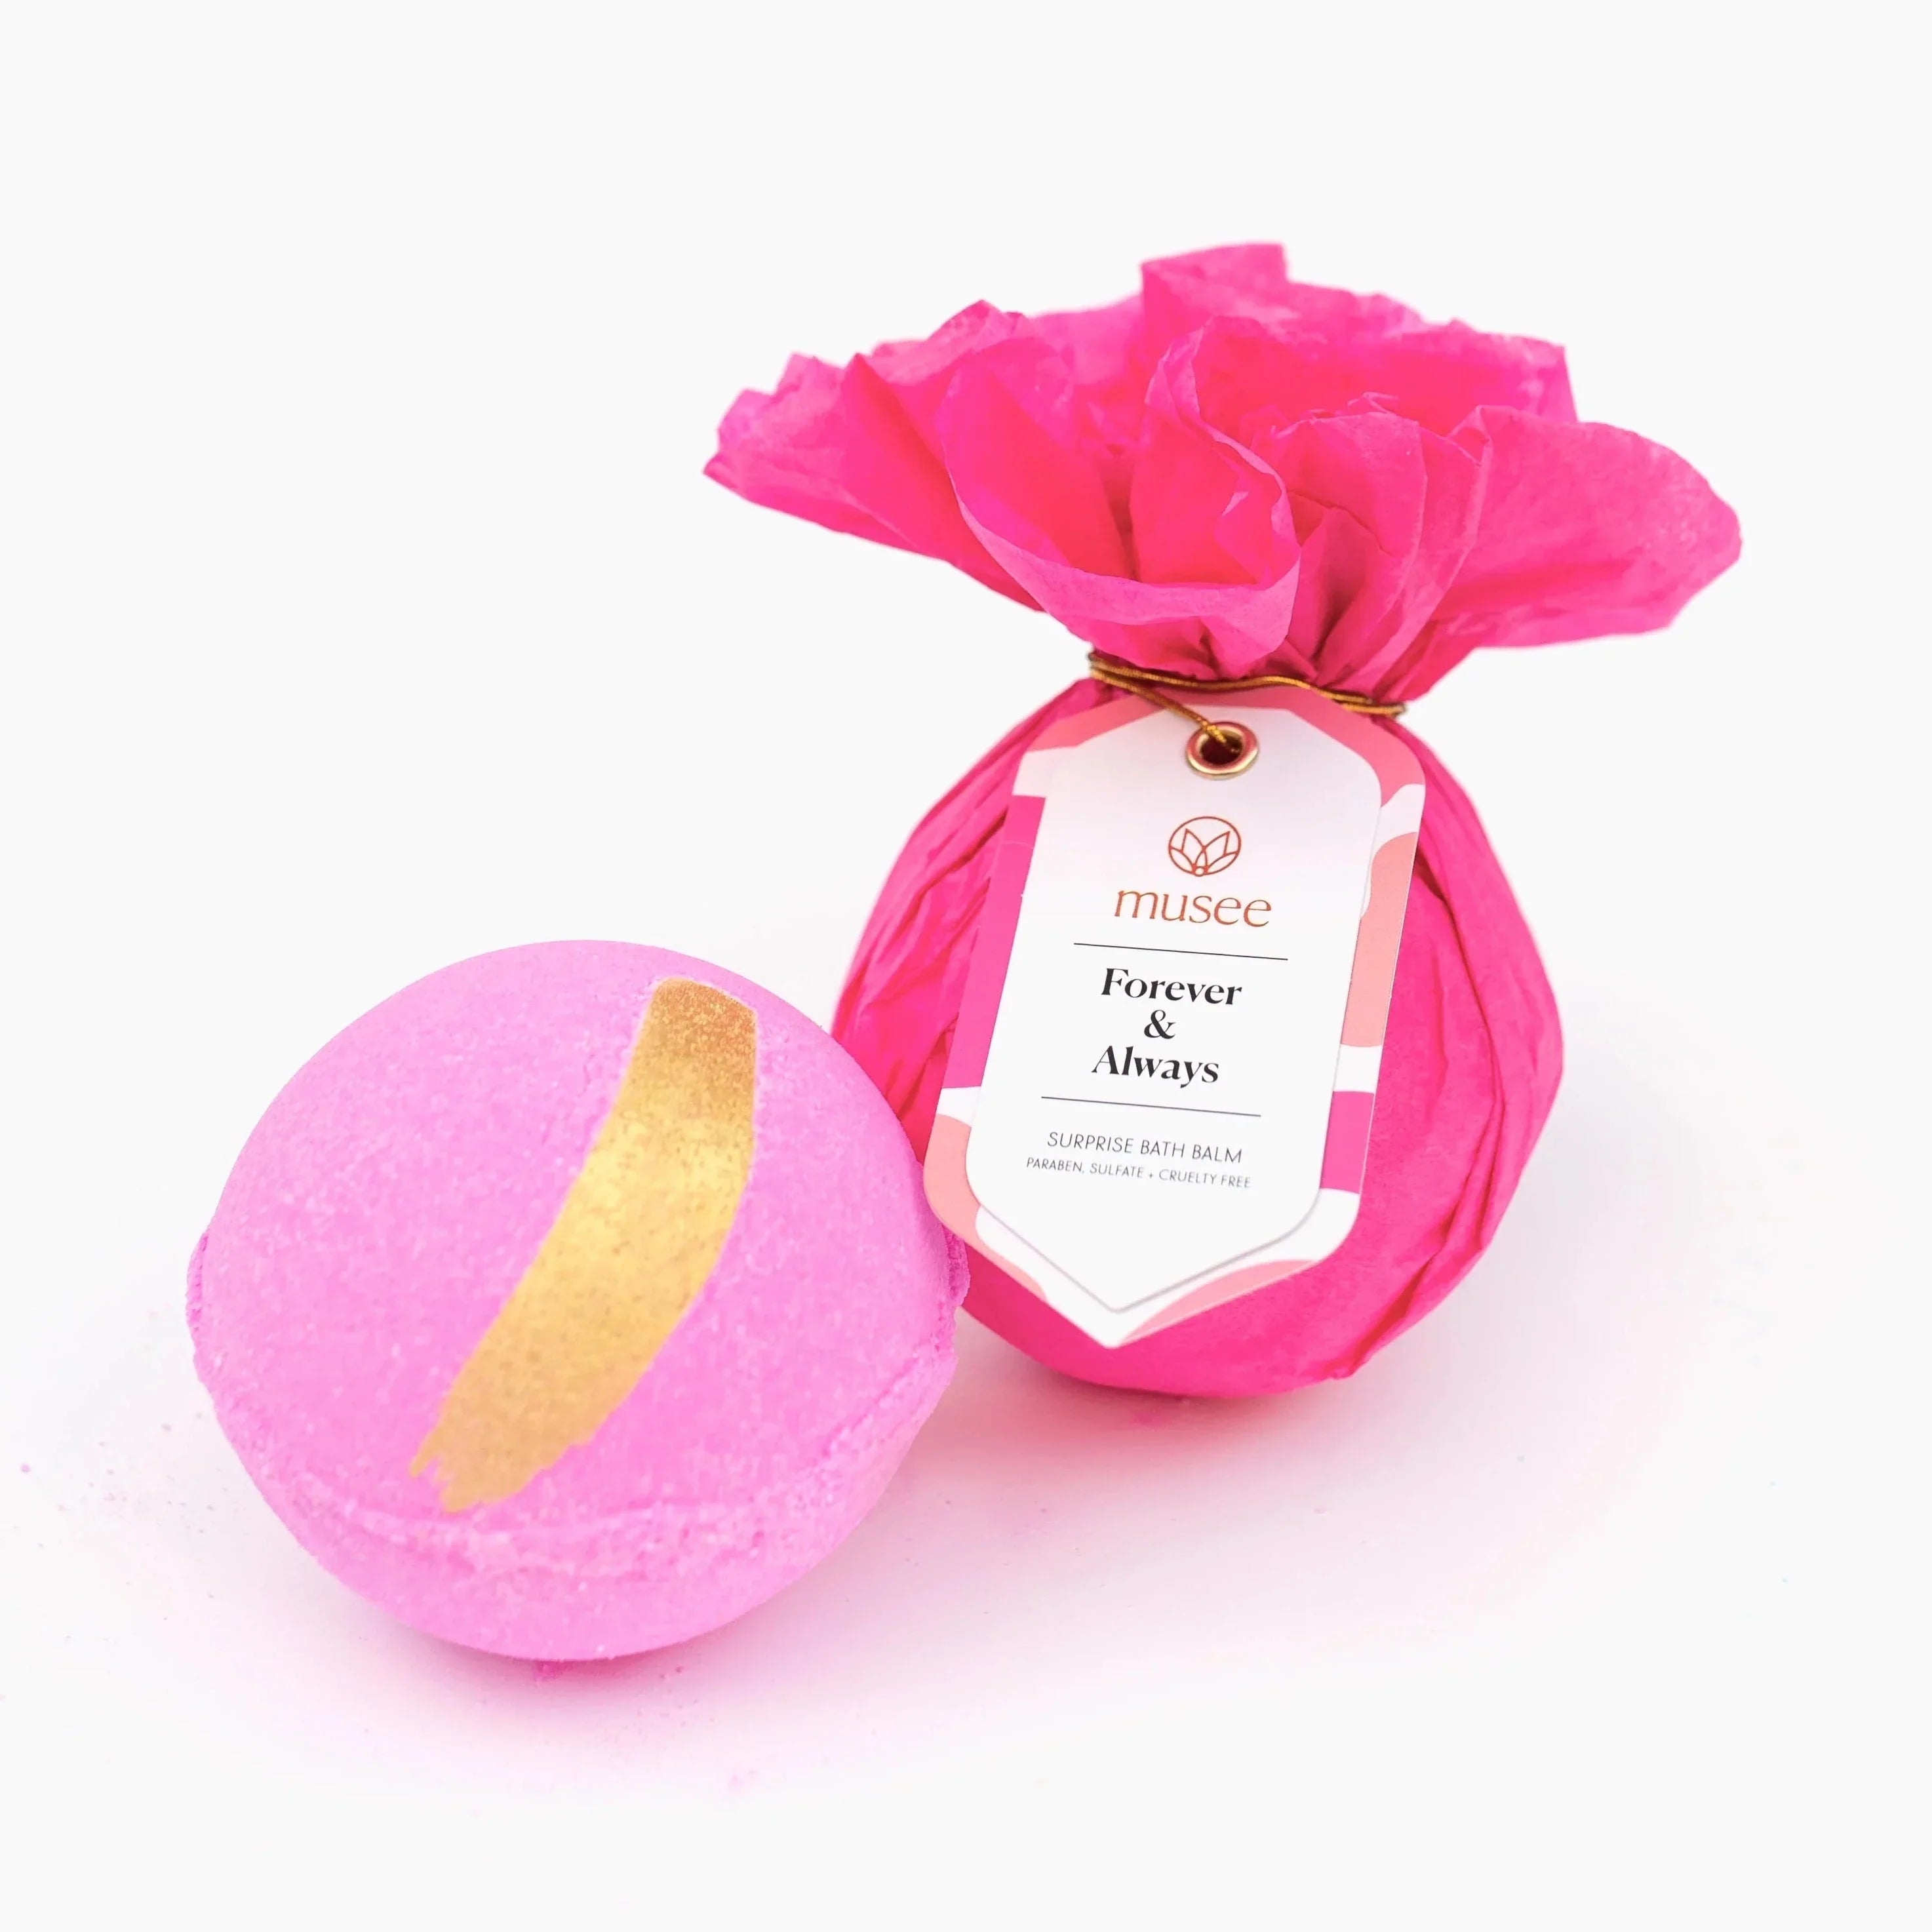 Hot pink tissue paper for bath bomb with a pin and white tag with black text that reads &quot;forever &amp; always&quot;. Actual bath bomb is pink with a gold accent stripe at the top